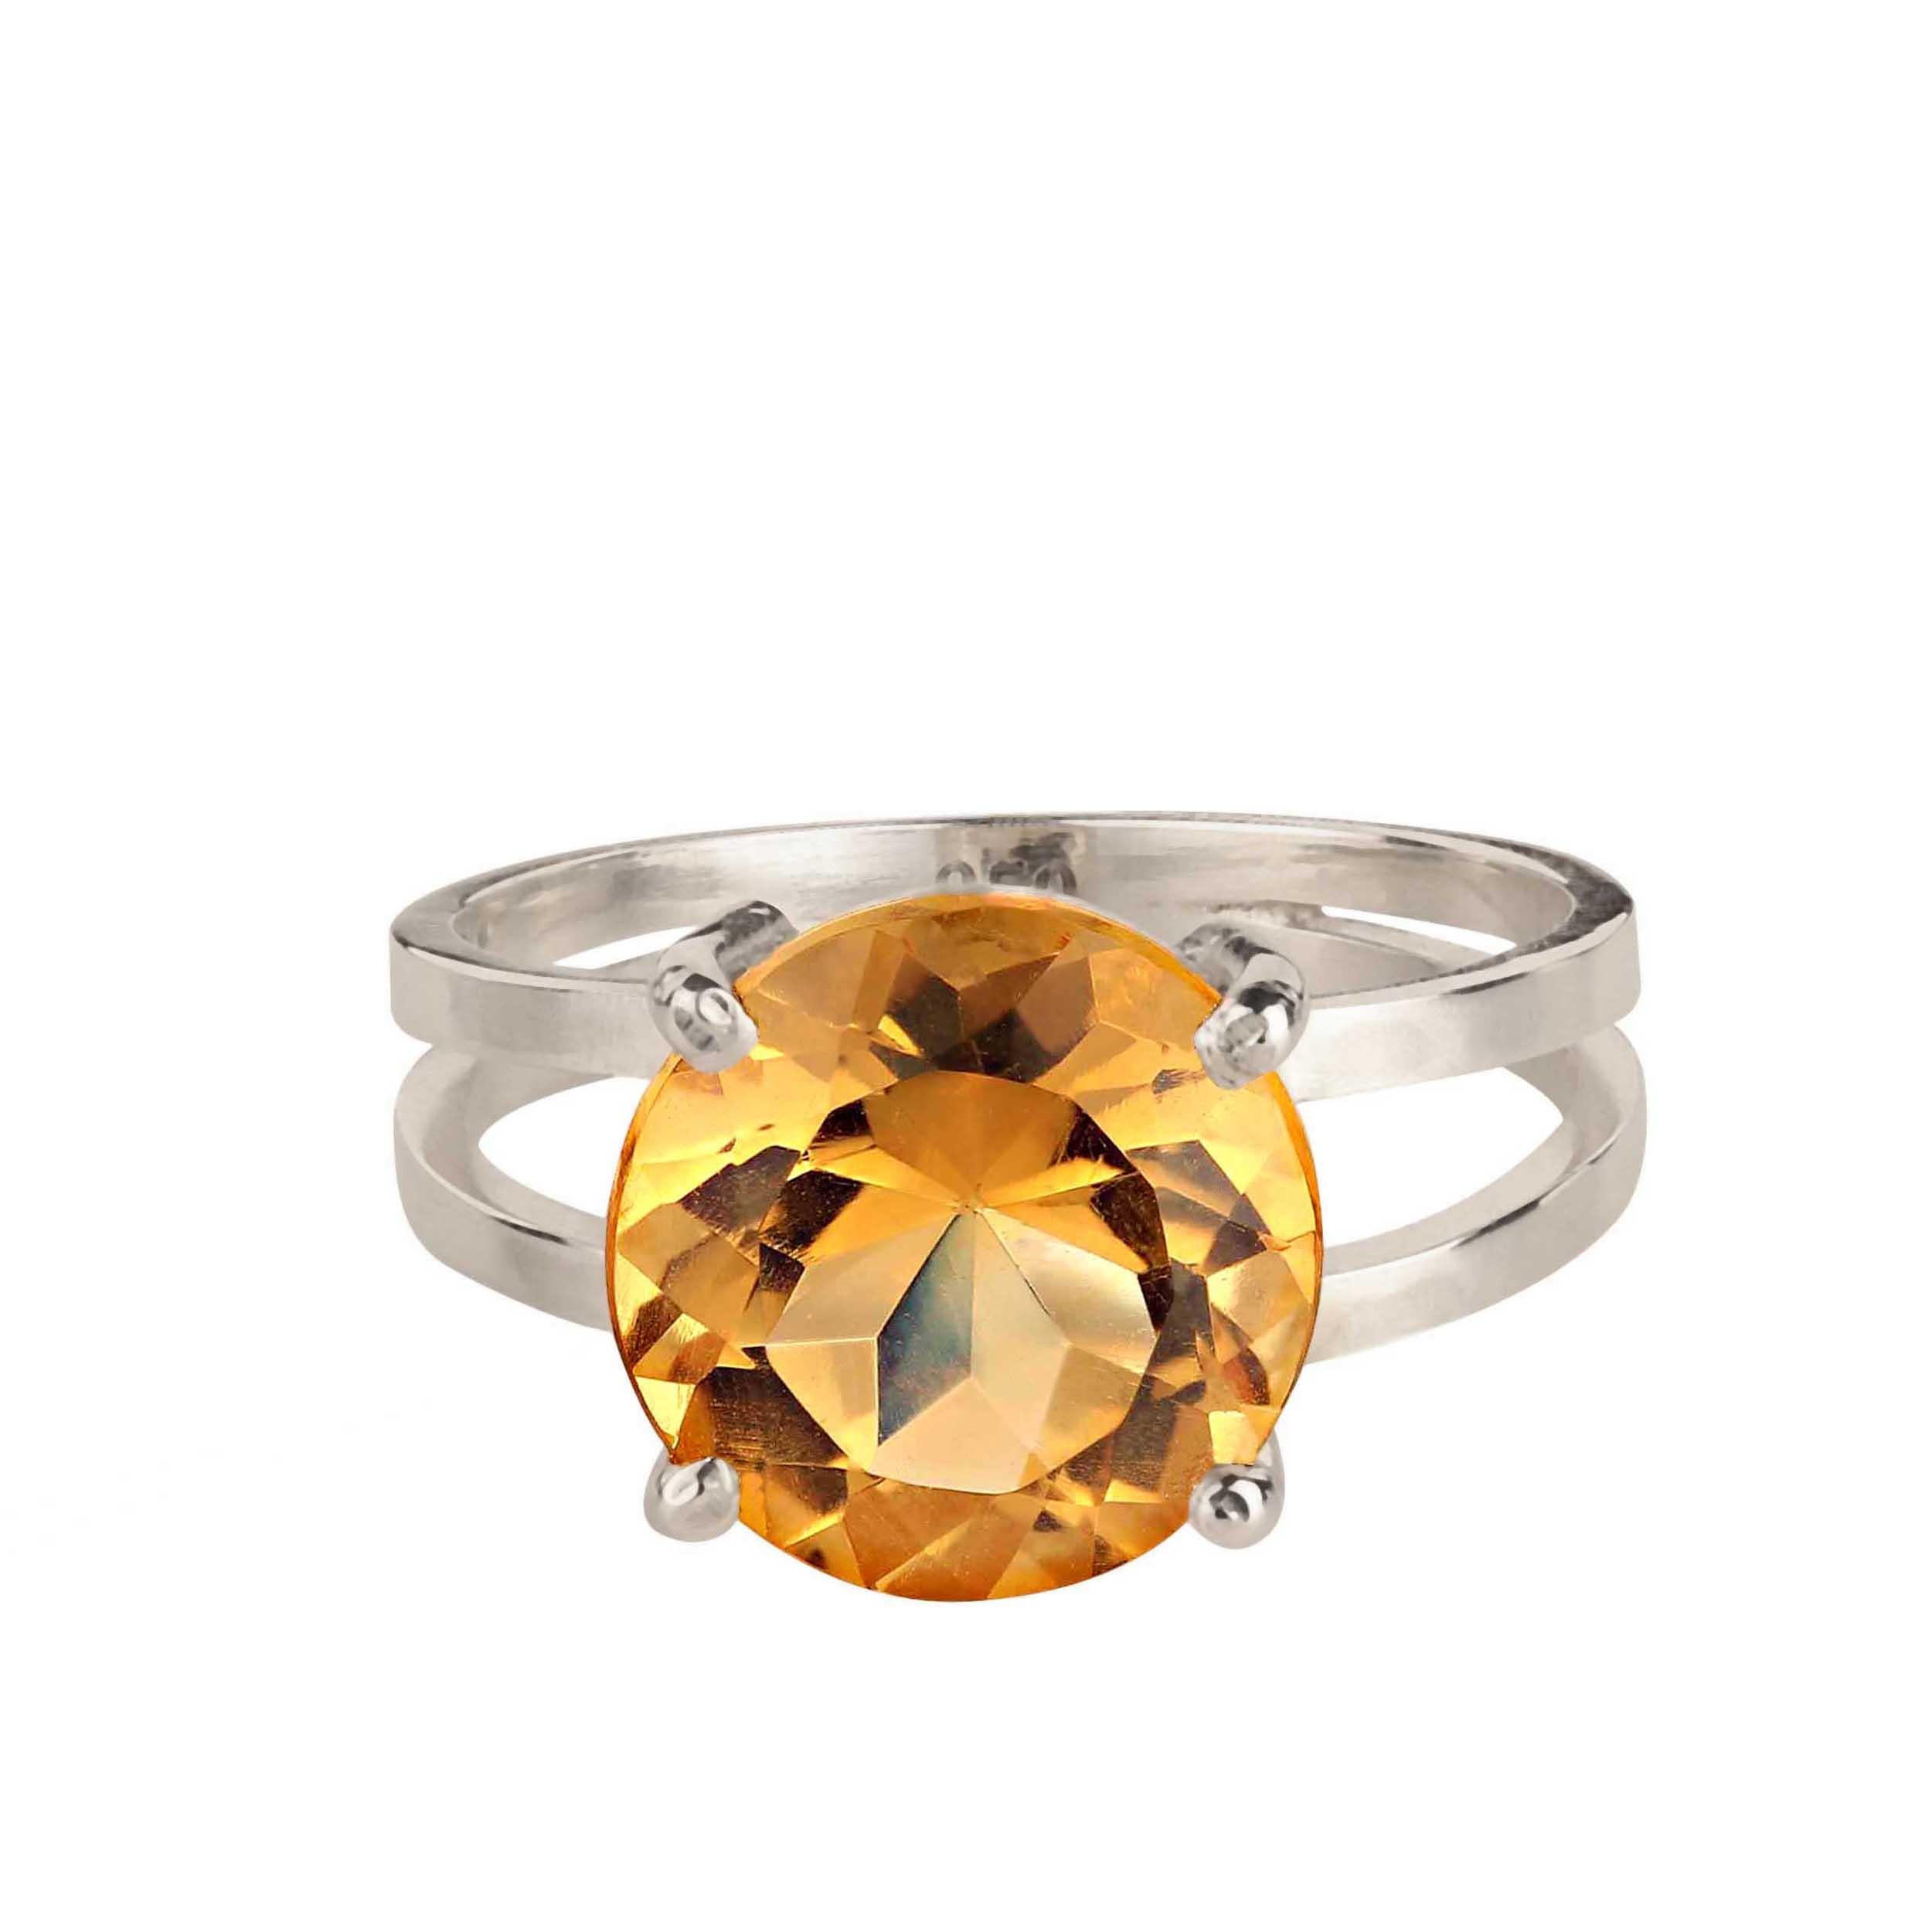 Unusual round 4.3Ct Citrine in handmade Sterling Silver ring.  This handcrafted Sterling Silver ring was created in shop of our favorite vendor in Belo Horizonte, Minas Gerais, Brasil. The 11MM round Citrine is a gorgeous honey color and sits in a